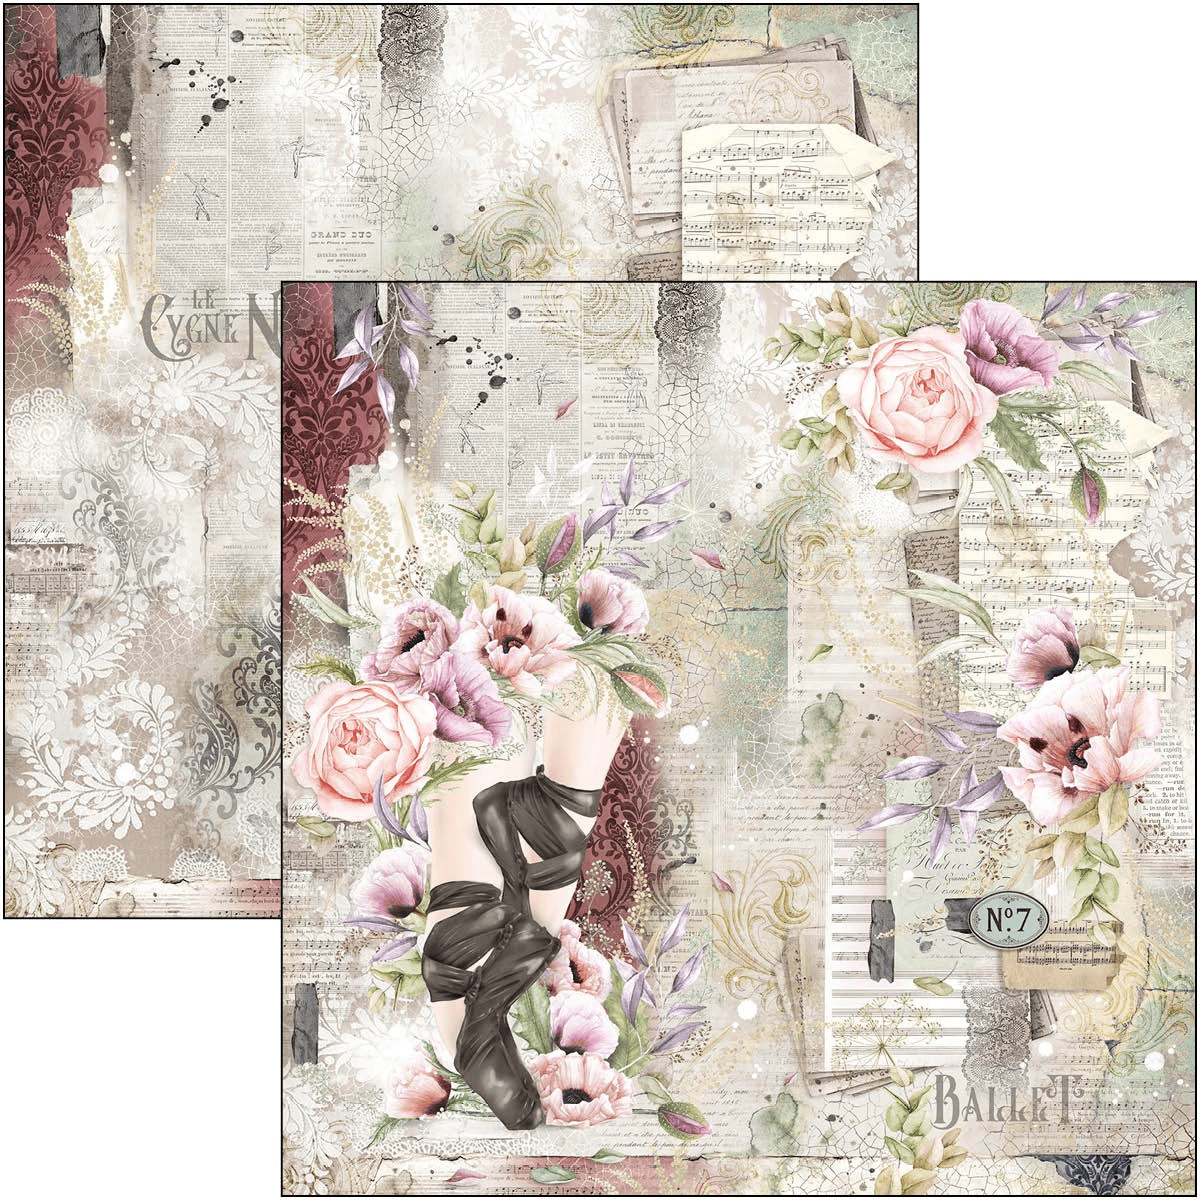 Ciao Bella Time for Home 12x12 Scrapbook Paper Pad for Decoupage